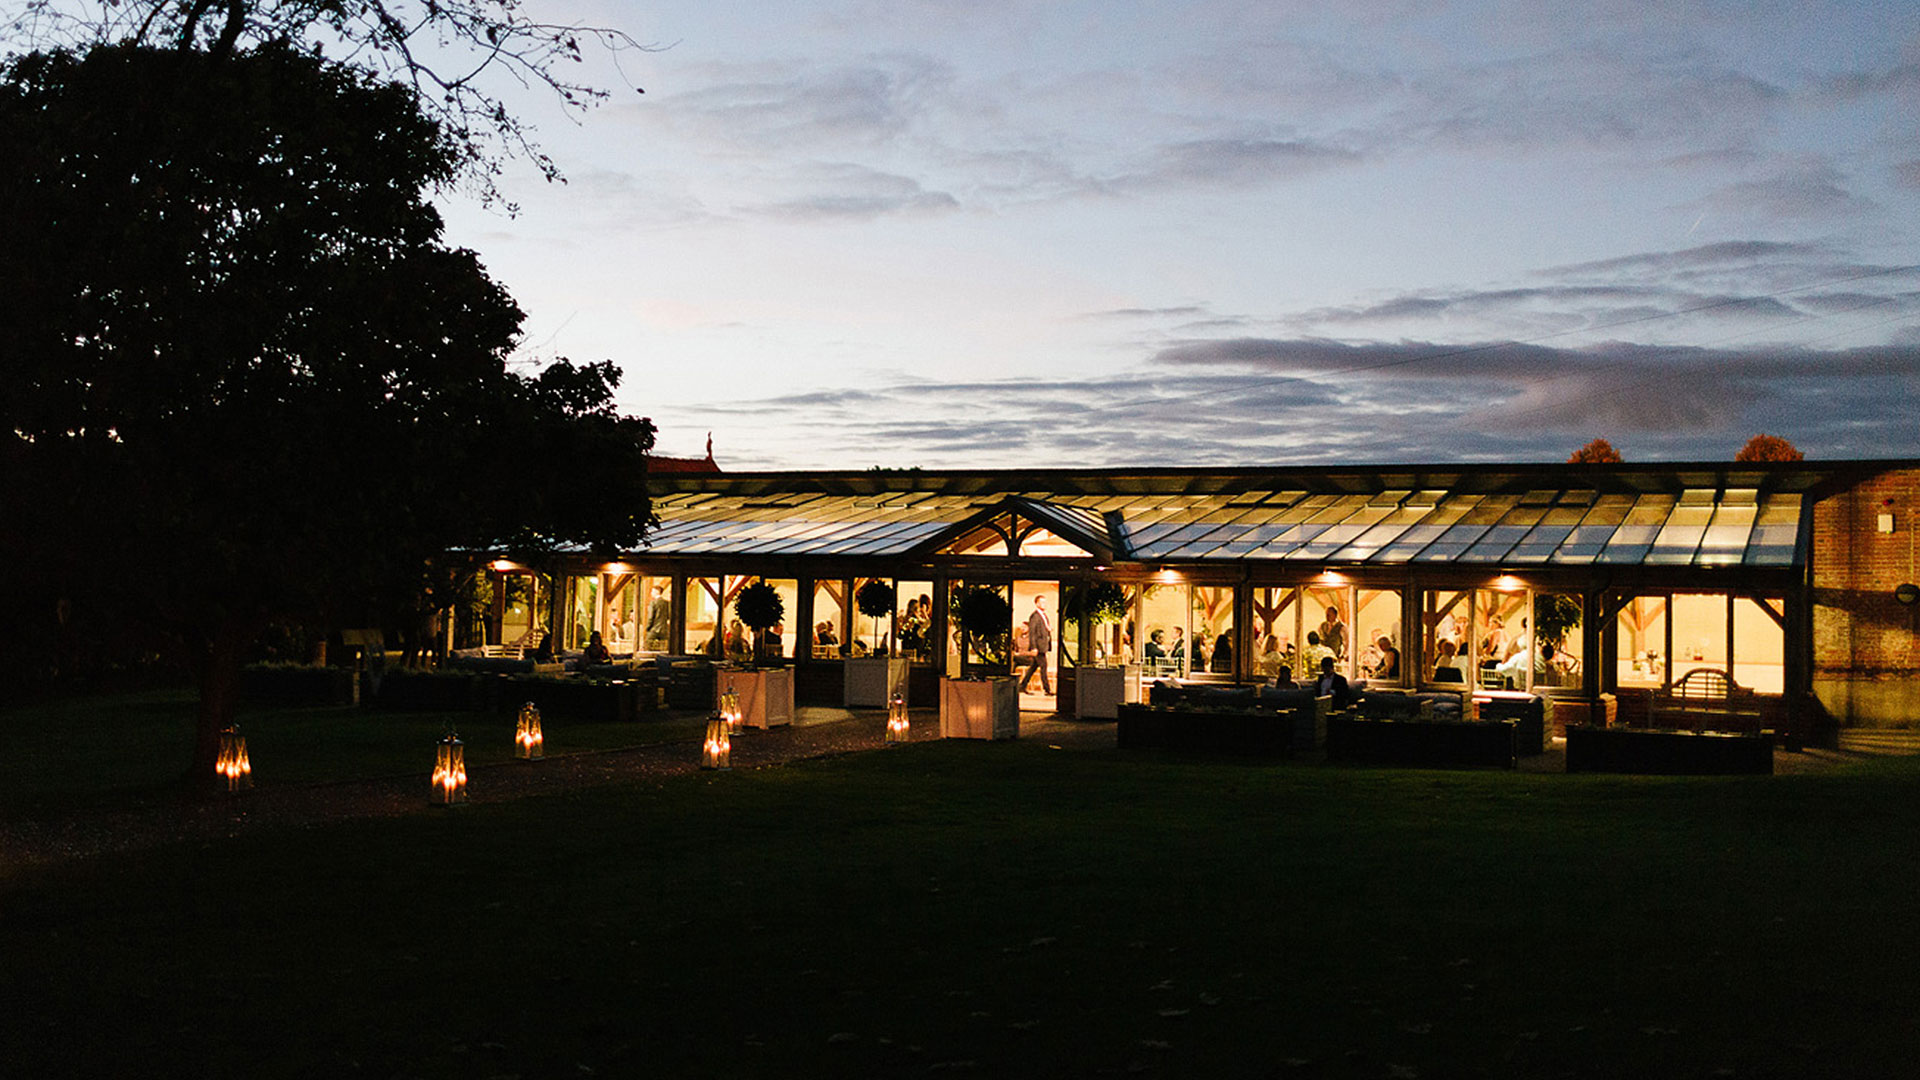 The Orangery looks beautiful at night and the wedding aisle lined with lanterns - ceremony wedding venues in Essex